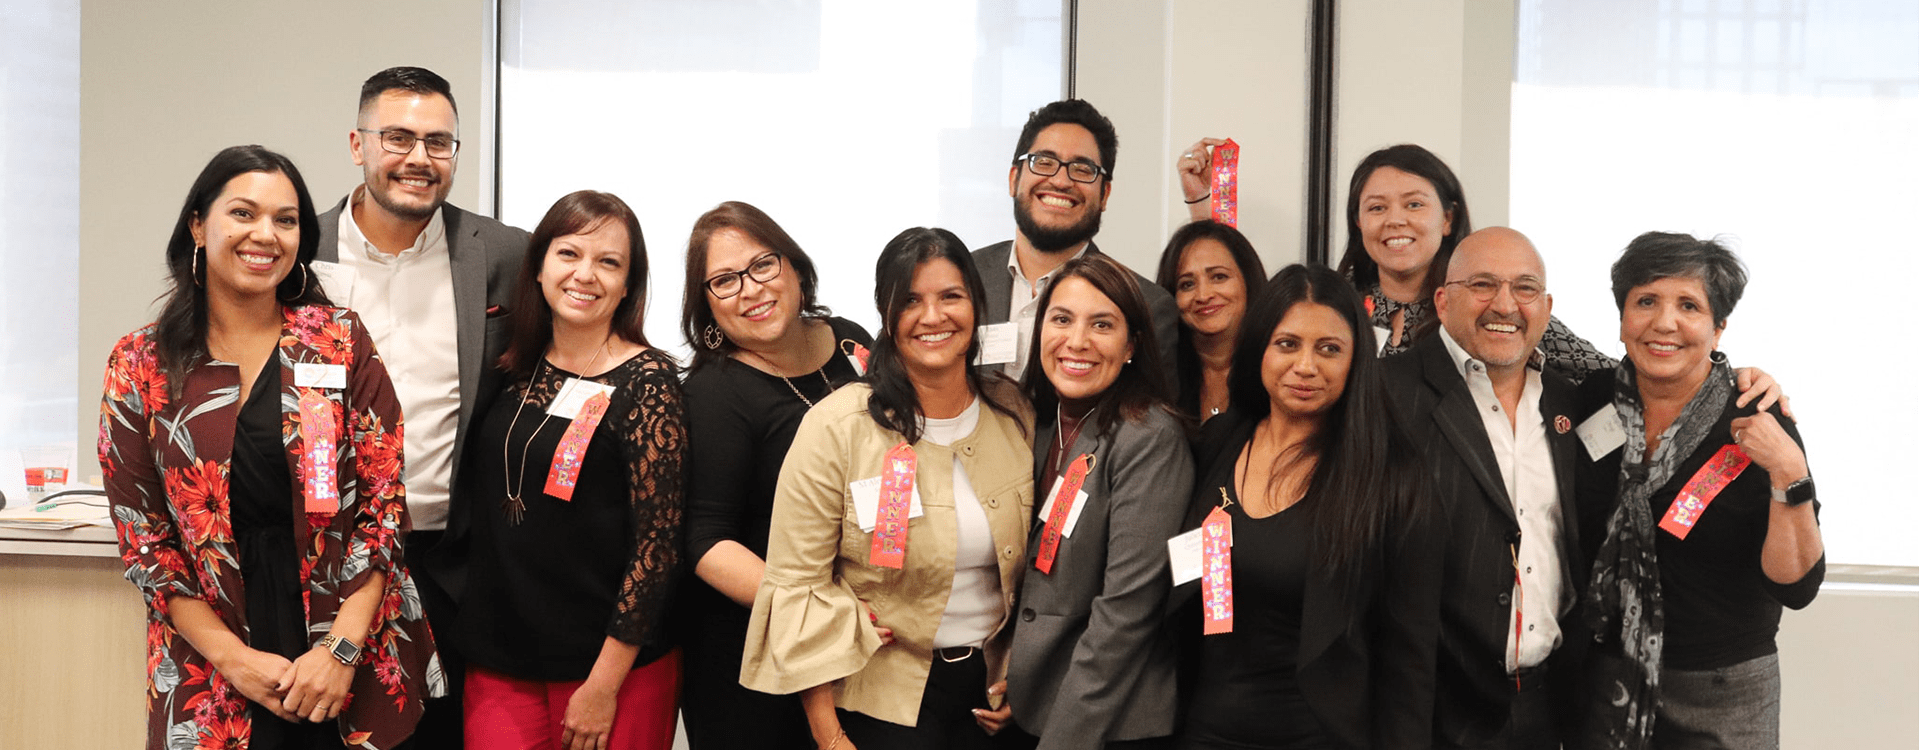 Welcome to the Latino Leadership Institute